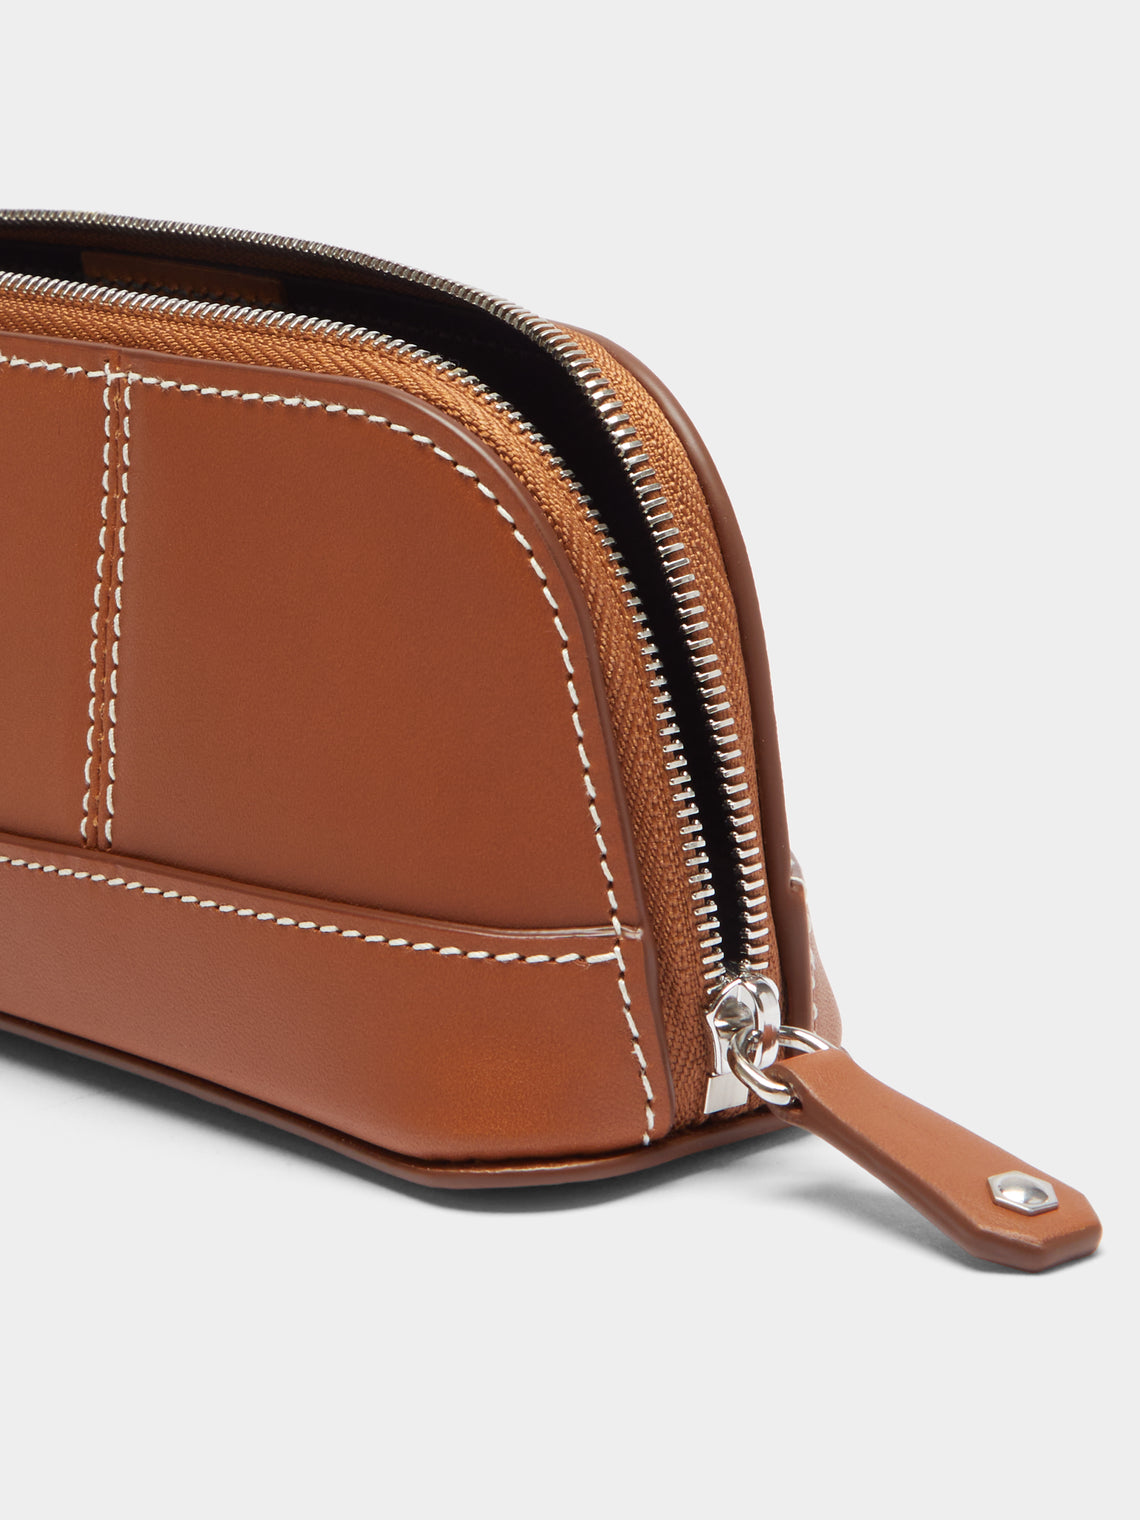 Connolly - Leather Pencil Case - Tan - ABASK